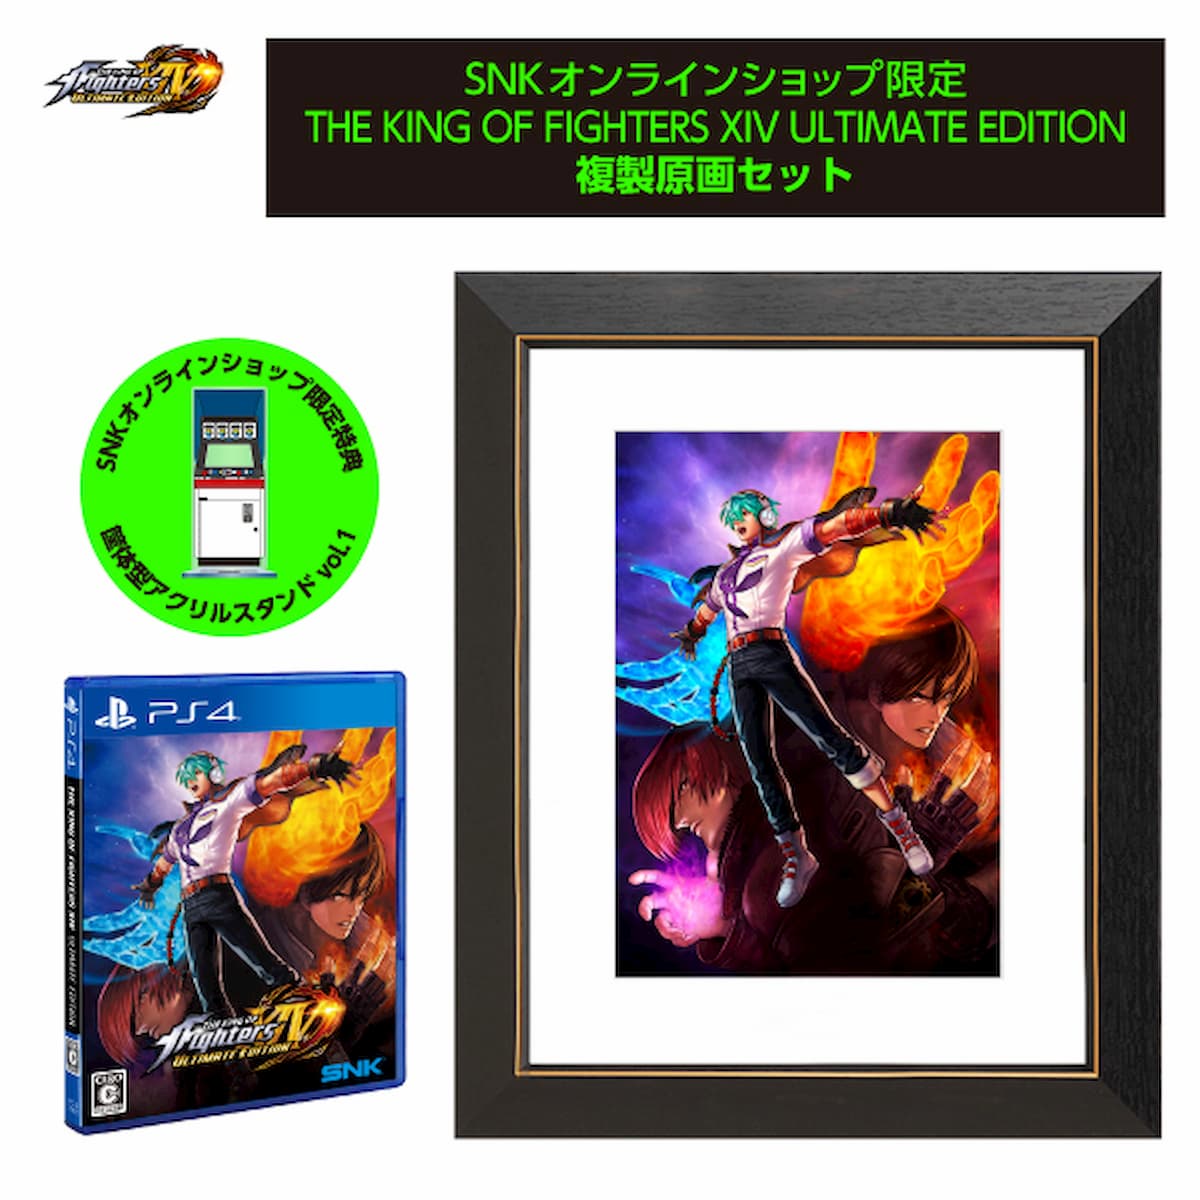 THE KING OF FIGHTERS XIV ULTIMATE EDITION Duplicate Original Picture Set --PS4